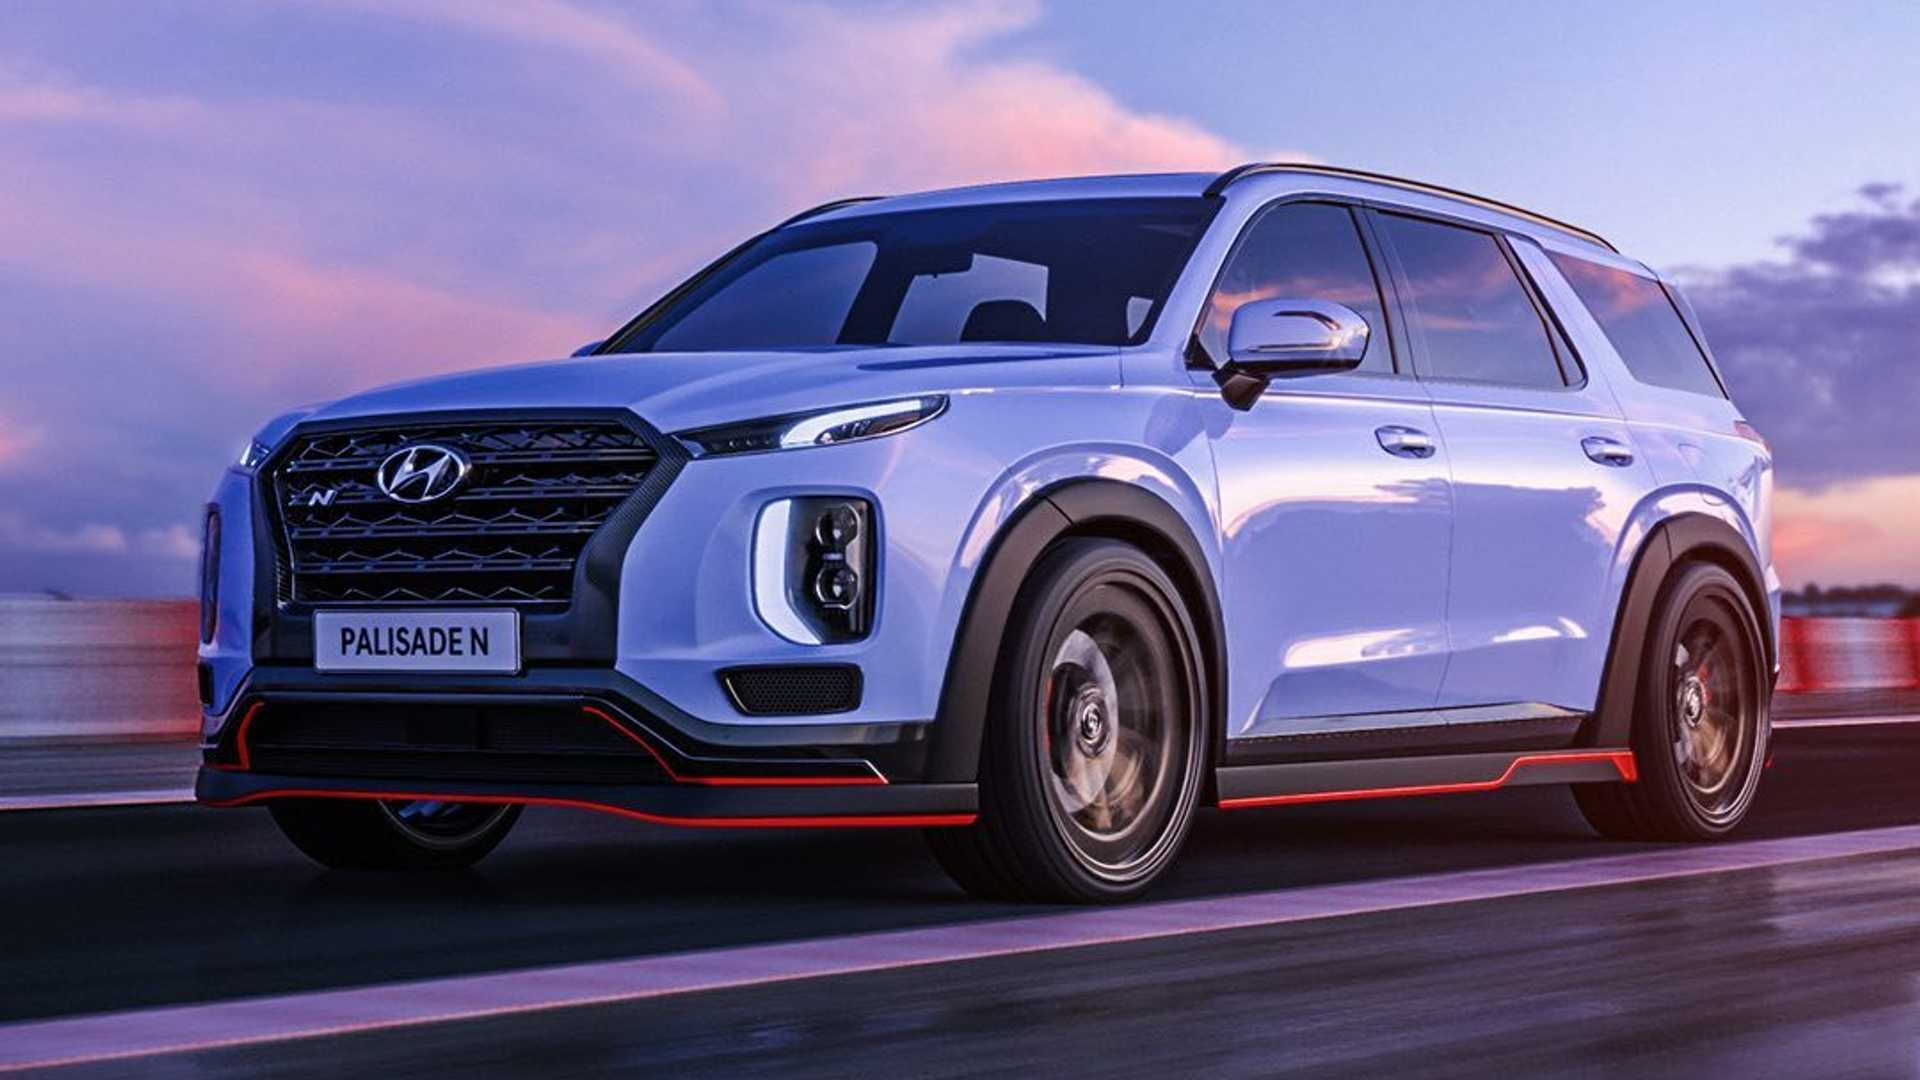 Hyundai N has fun designing hot versions of the Palisade, Prophecy concept